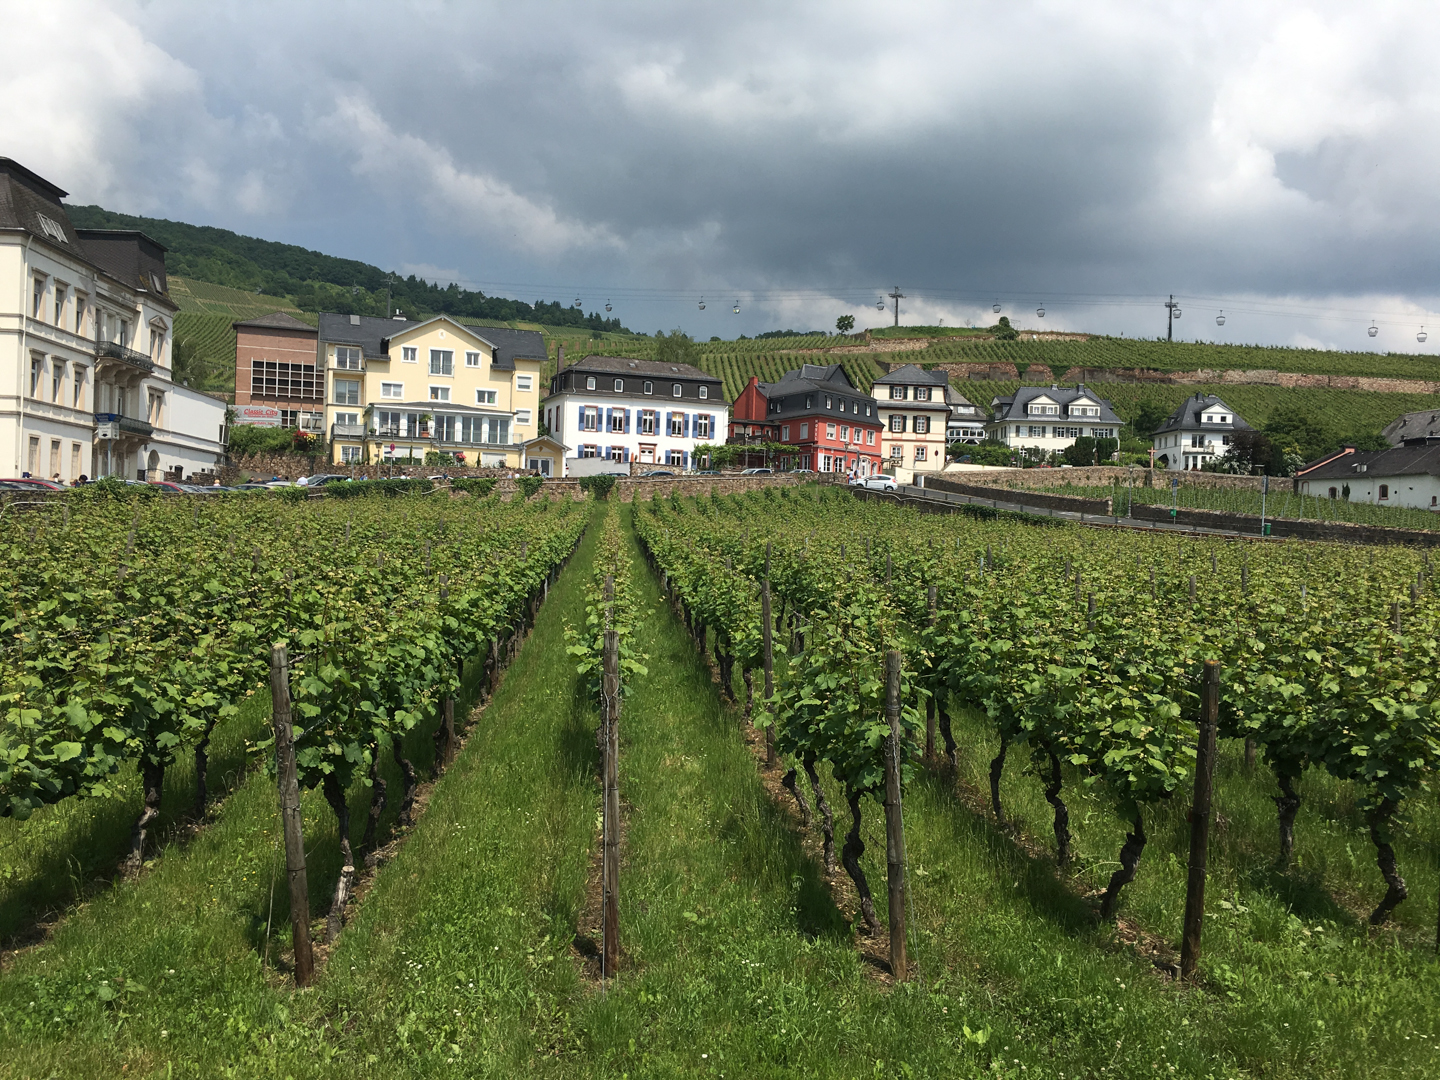 Rüdesheim Vineyards - wherever there's space there are vines